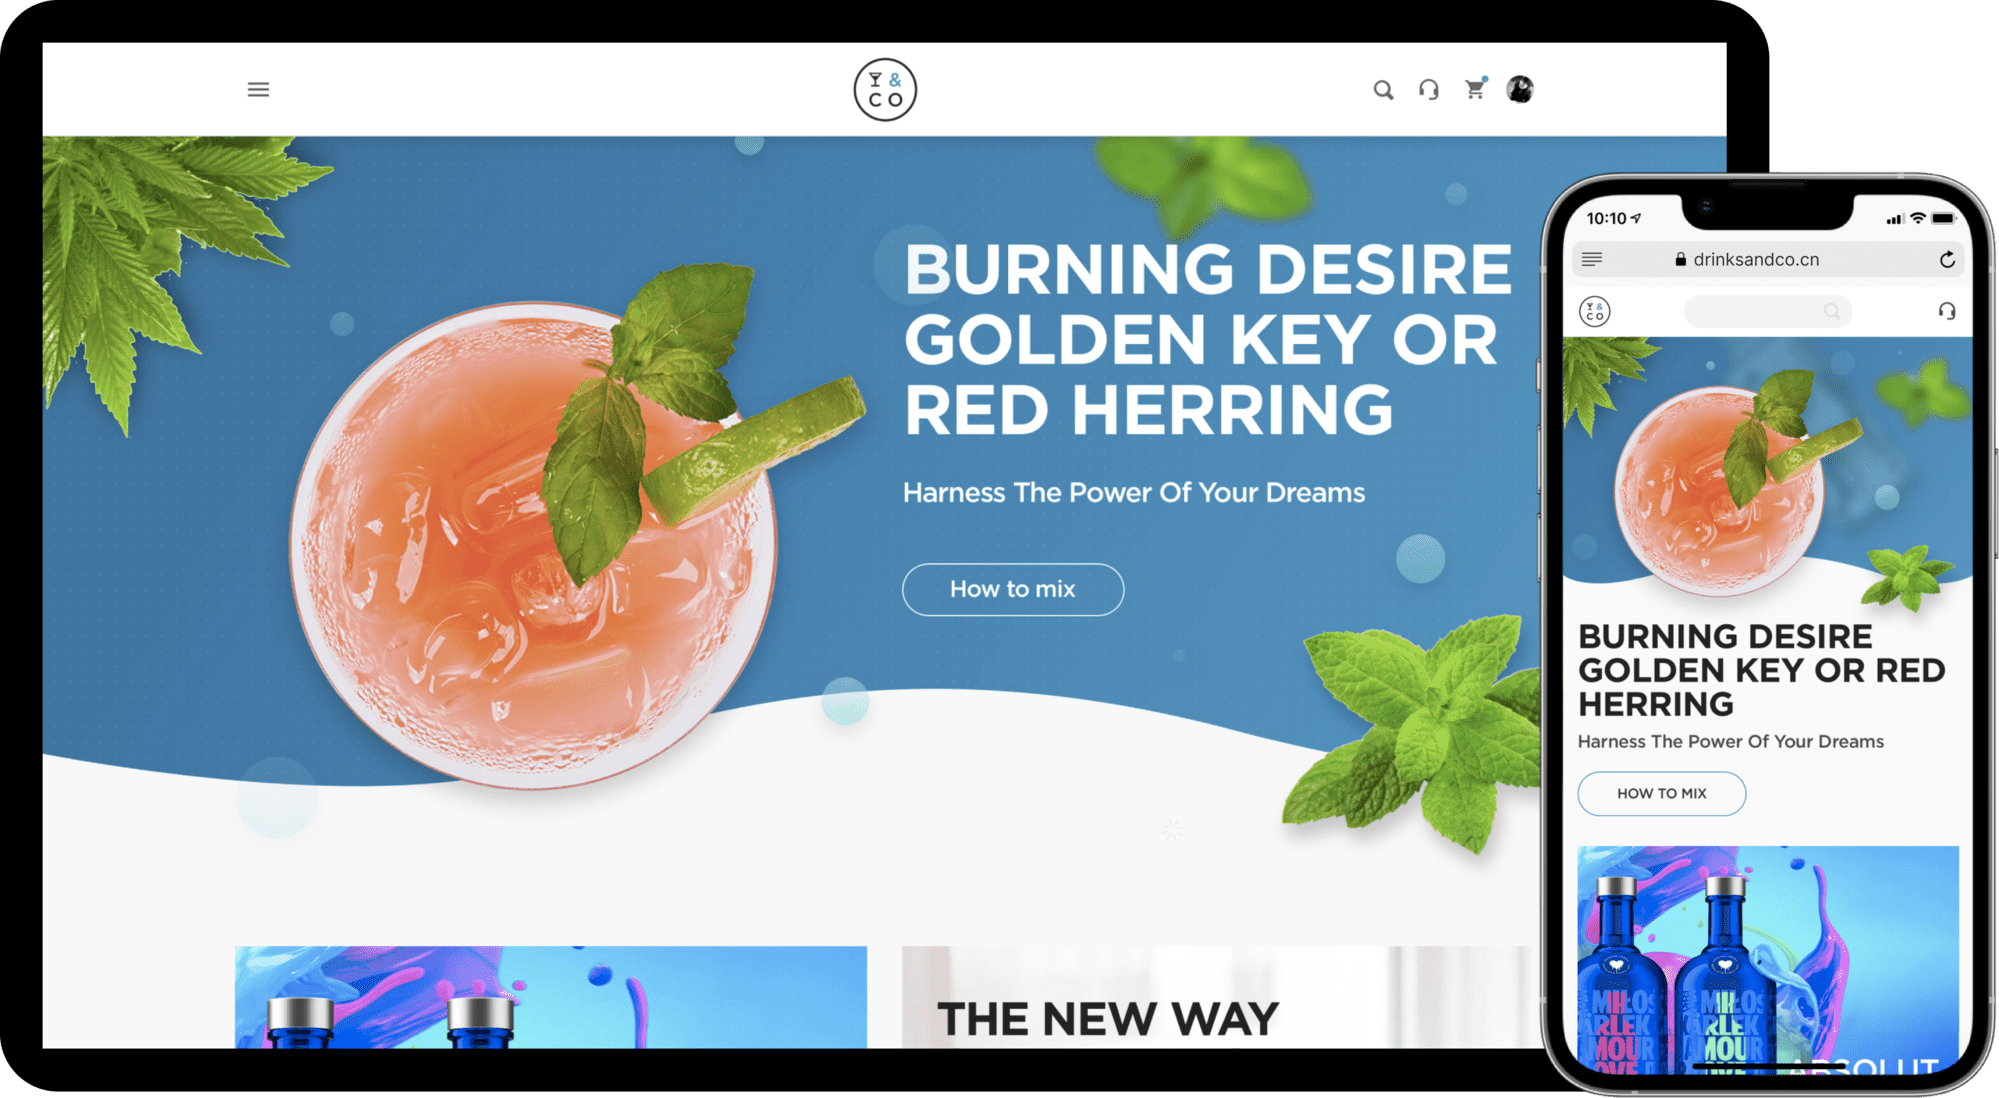 IT Consultis (ITC) helped Pernod Ricard build an eCommerce Drinks&Co website for its Chinese market